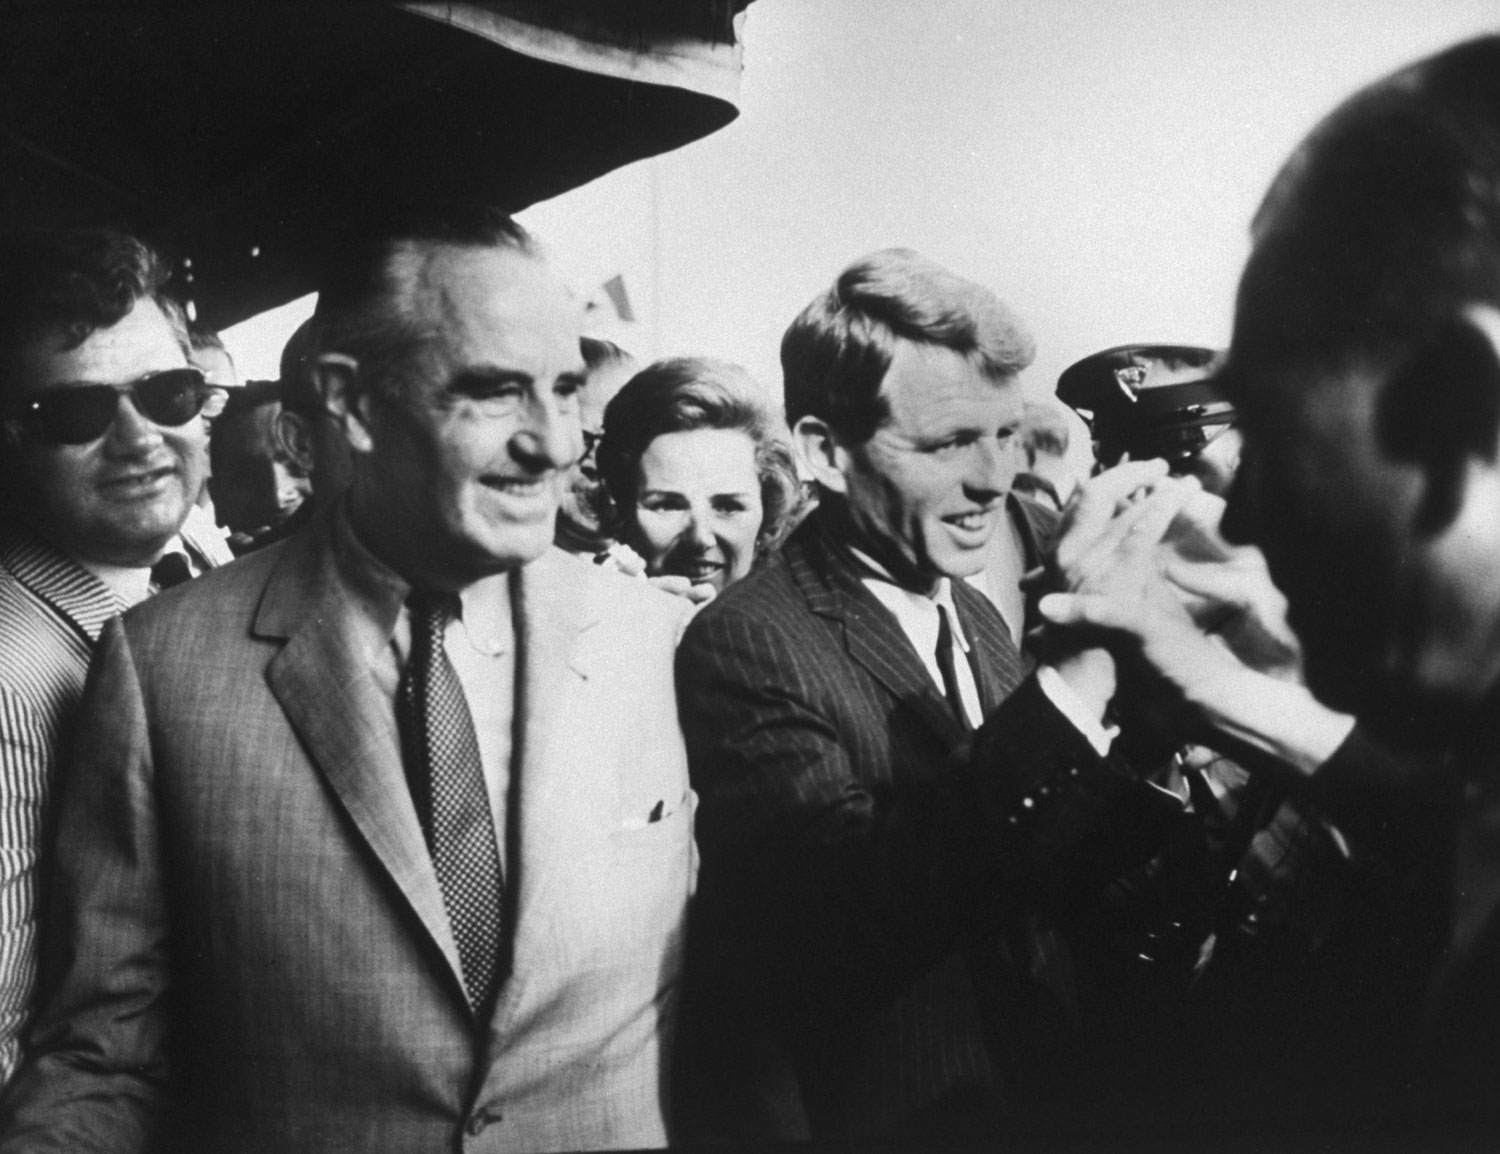 Robert F. Kennedy (right), his wife Ethell and Democratic stalwart Averell Harriman at a reception for Jackie Kennedy during the 1964 Democratic National Convention in Atlantic City, New Jersey.